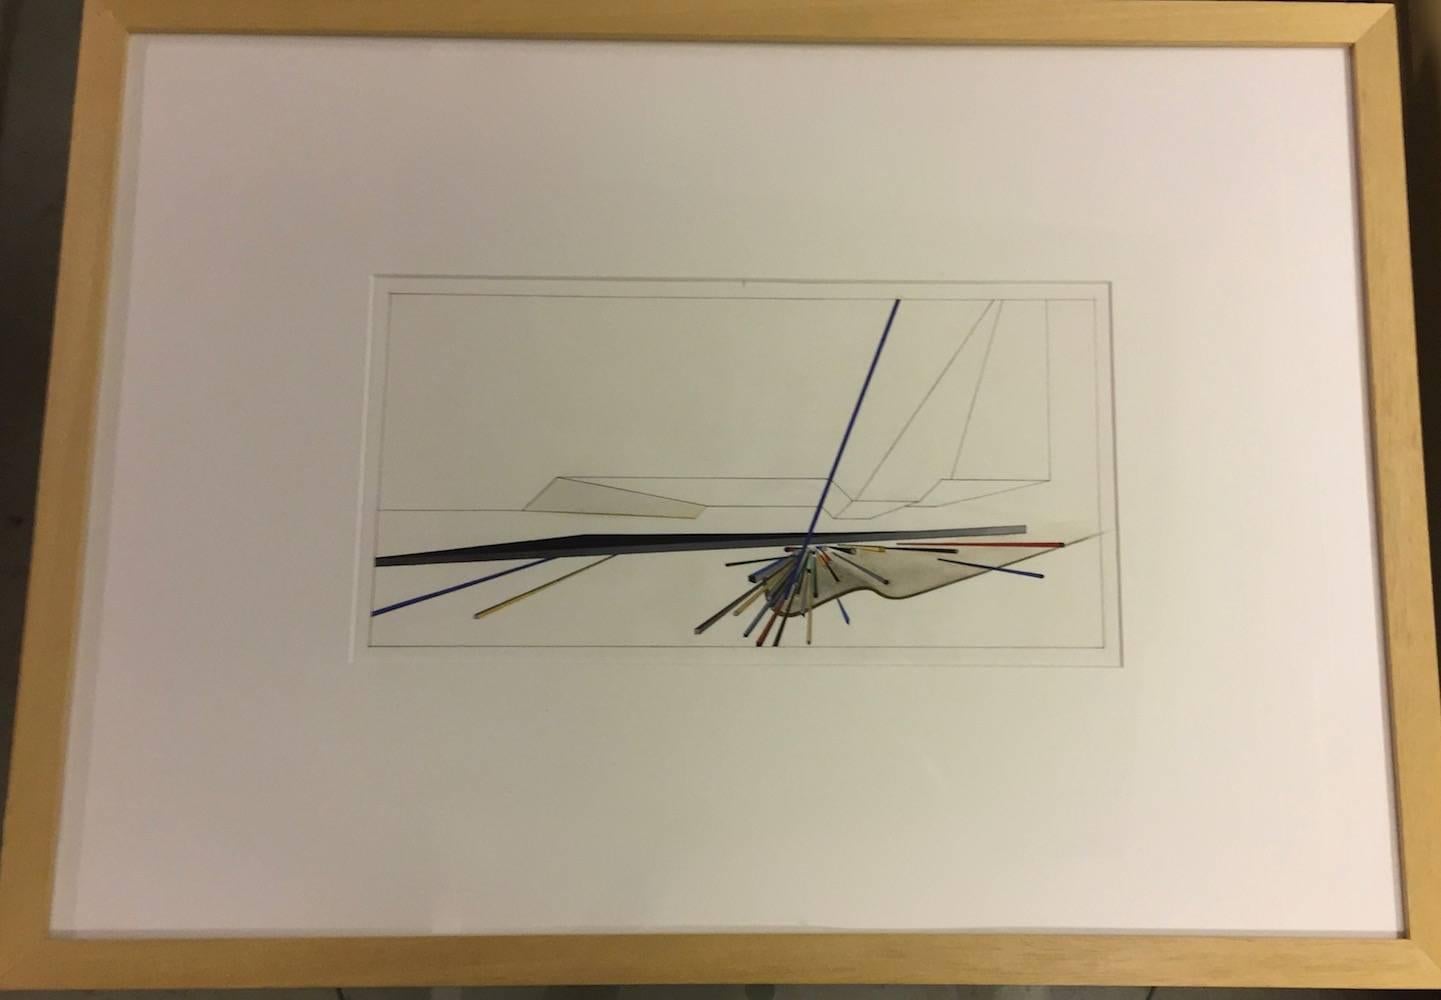 German Five Unique and Early Mixed Media Drawings by Zaha Hadid, Documented